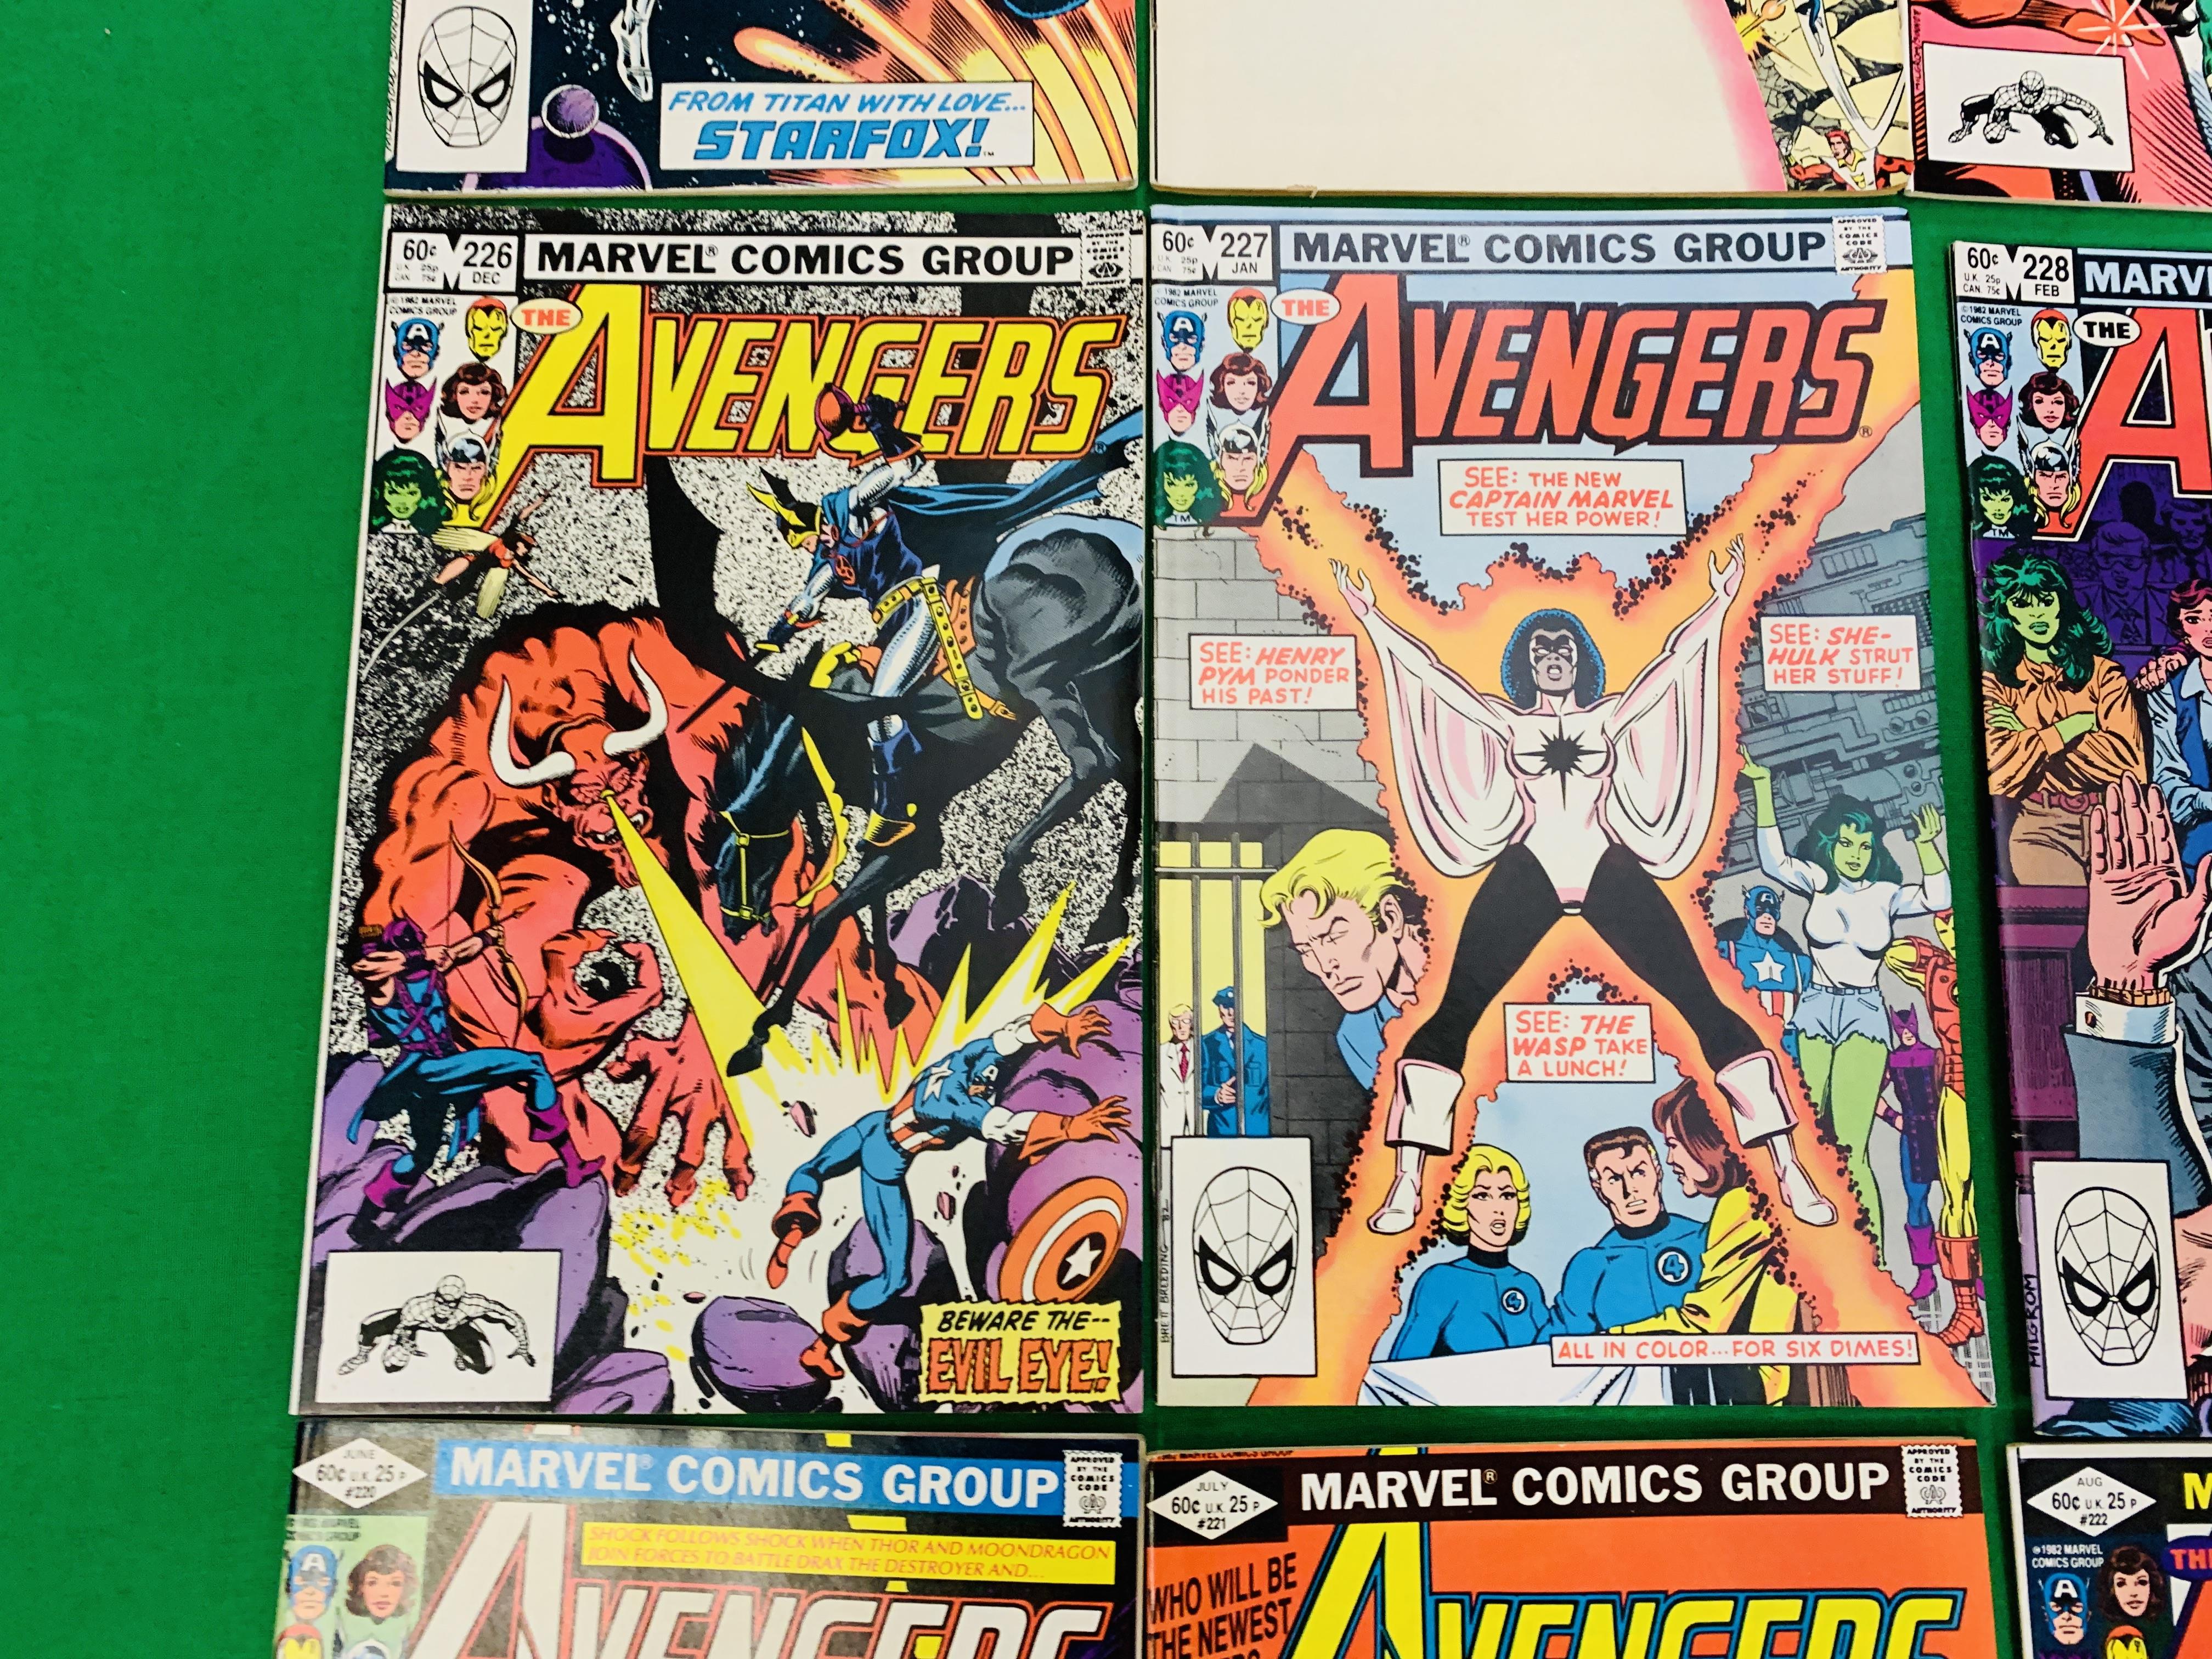 MARVEL COMICS THE AVENGERS NO. 101 - 299, MISSING ISSUES 103 AND 110. - Image 90 of 130